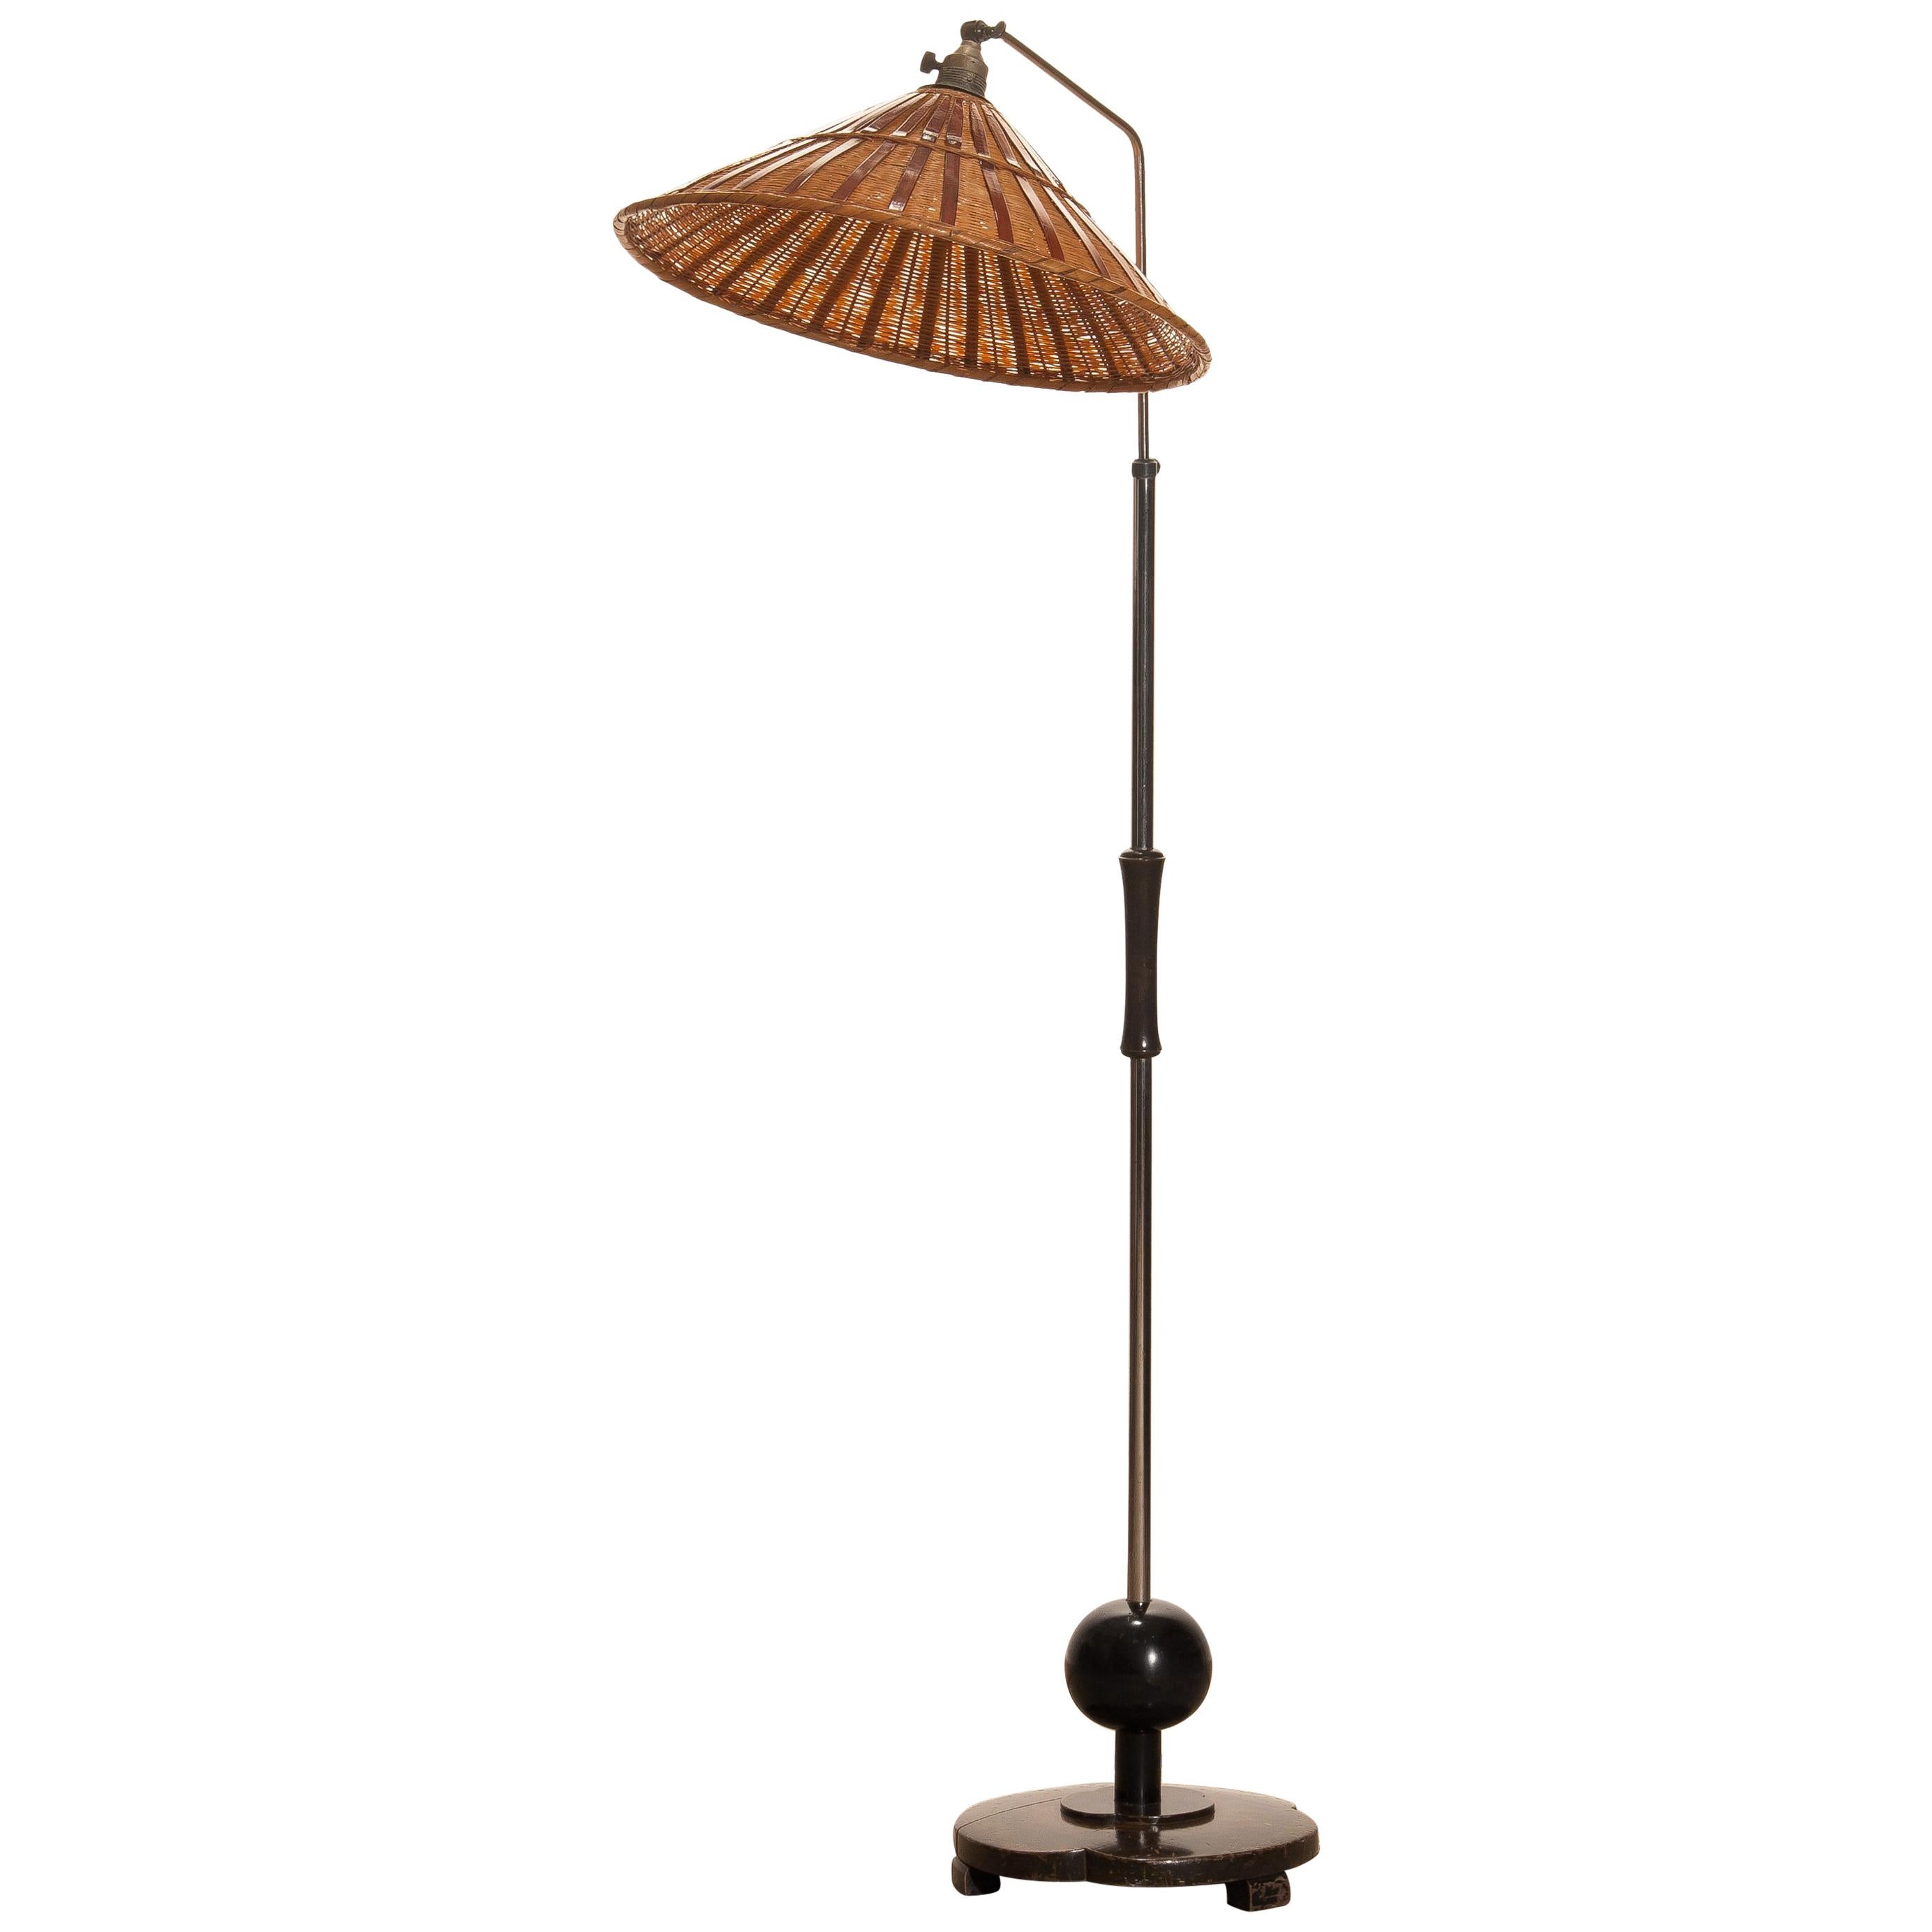 Limited edition: Numbered 12 out of 85,
1940s. This extremely beautiful and complete original, Italian, Art Deco or Jugendstil floor lamp with burl wood floor stand and handle is in perfect condition. The original handmade, wicker shade is also in